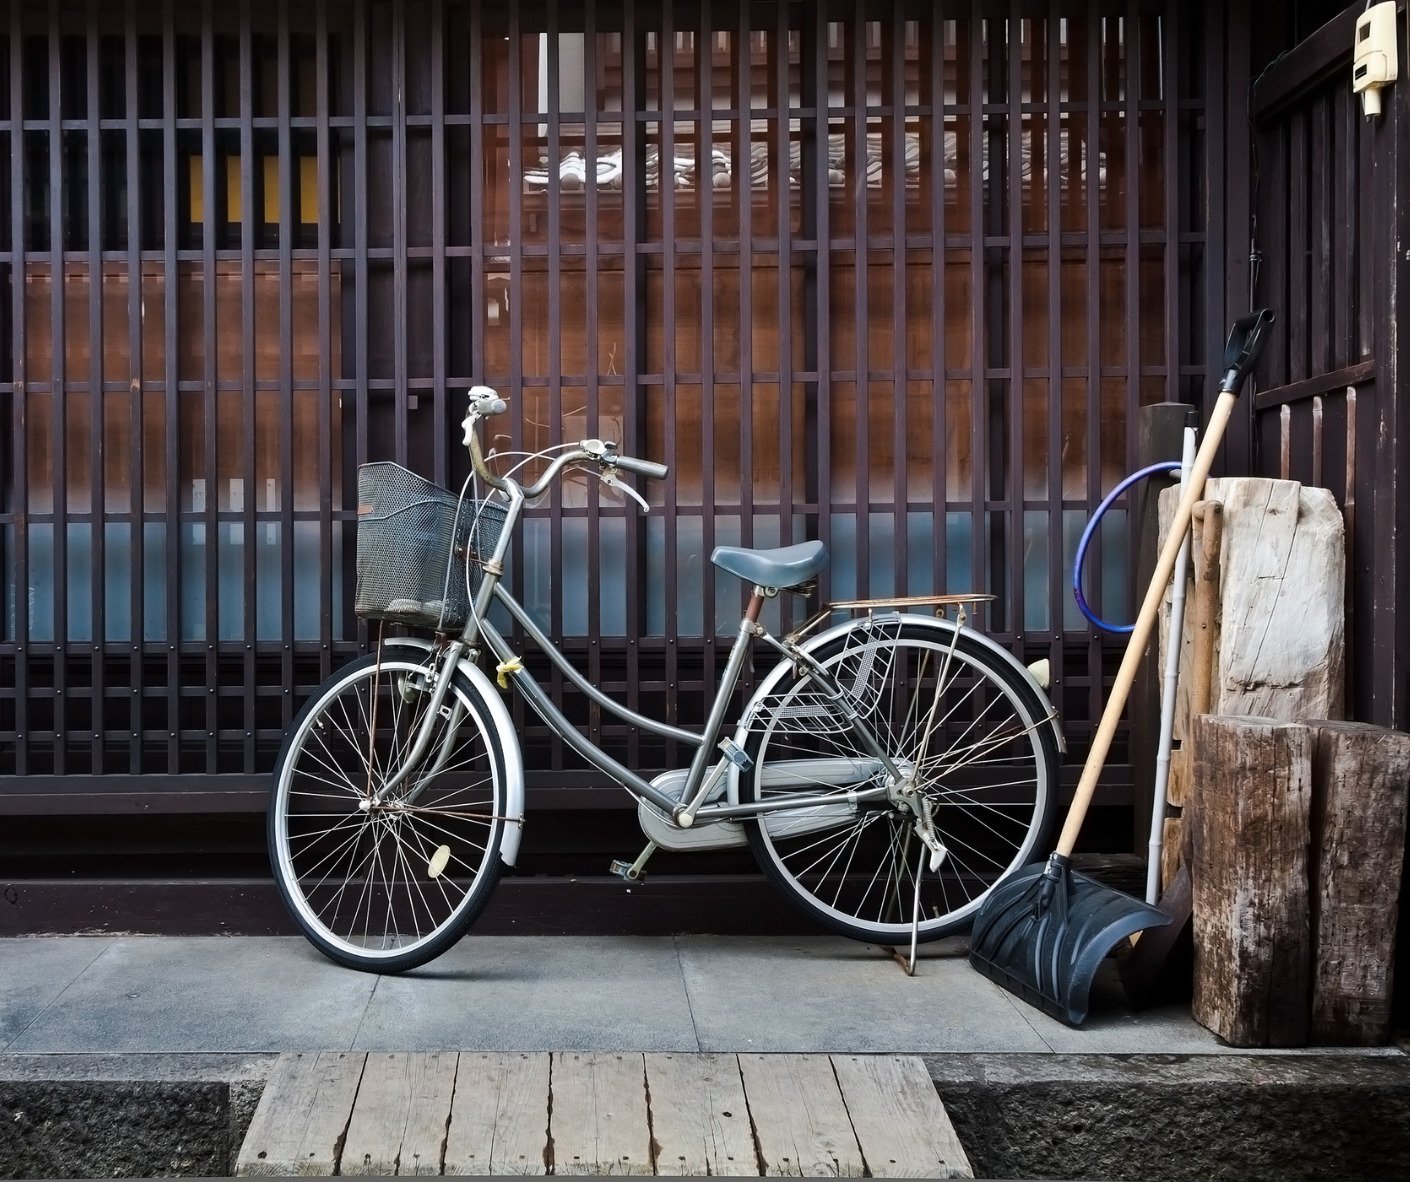 Buying and registering a used bicycle in Japan JobsInJapan